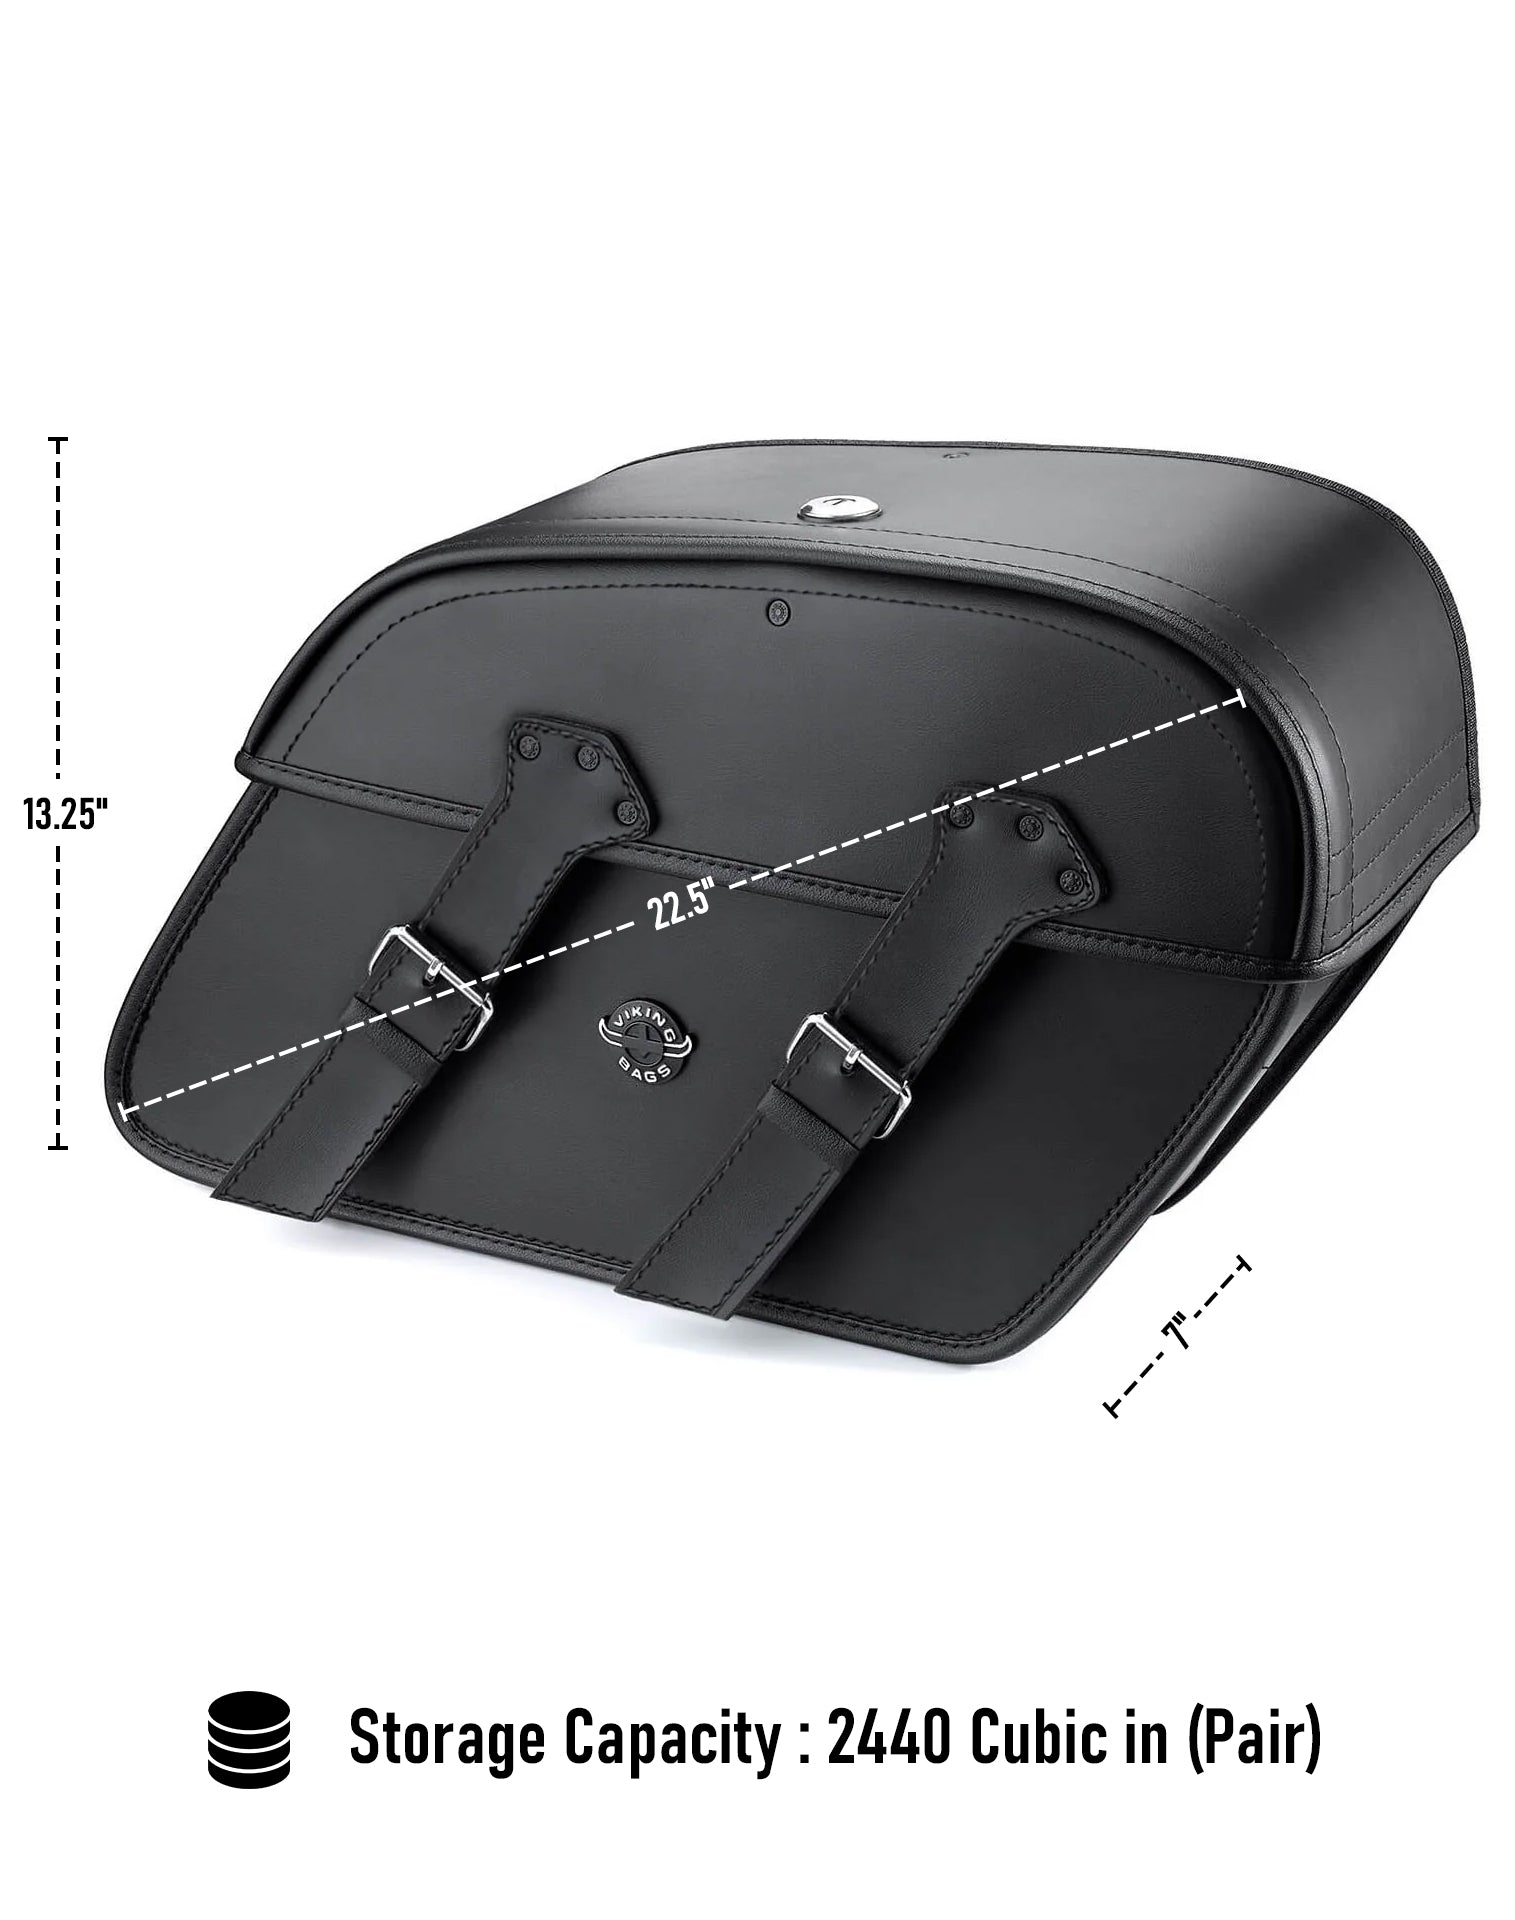 Viking Raven Extra Large Honda Vtx 1300 T Tourer Leather Motorcycle Saddlebags Can Store Your Ridings Gears